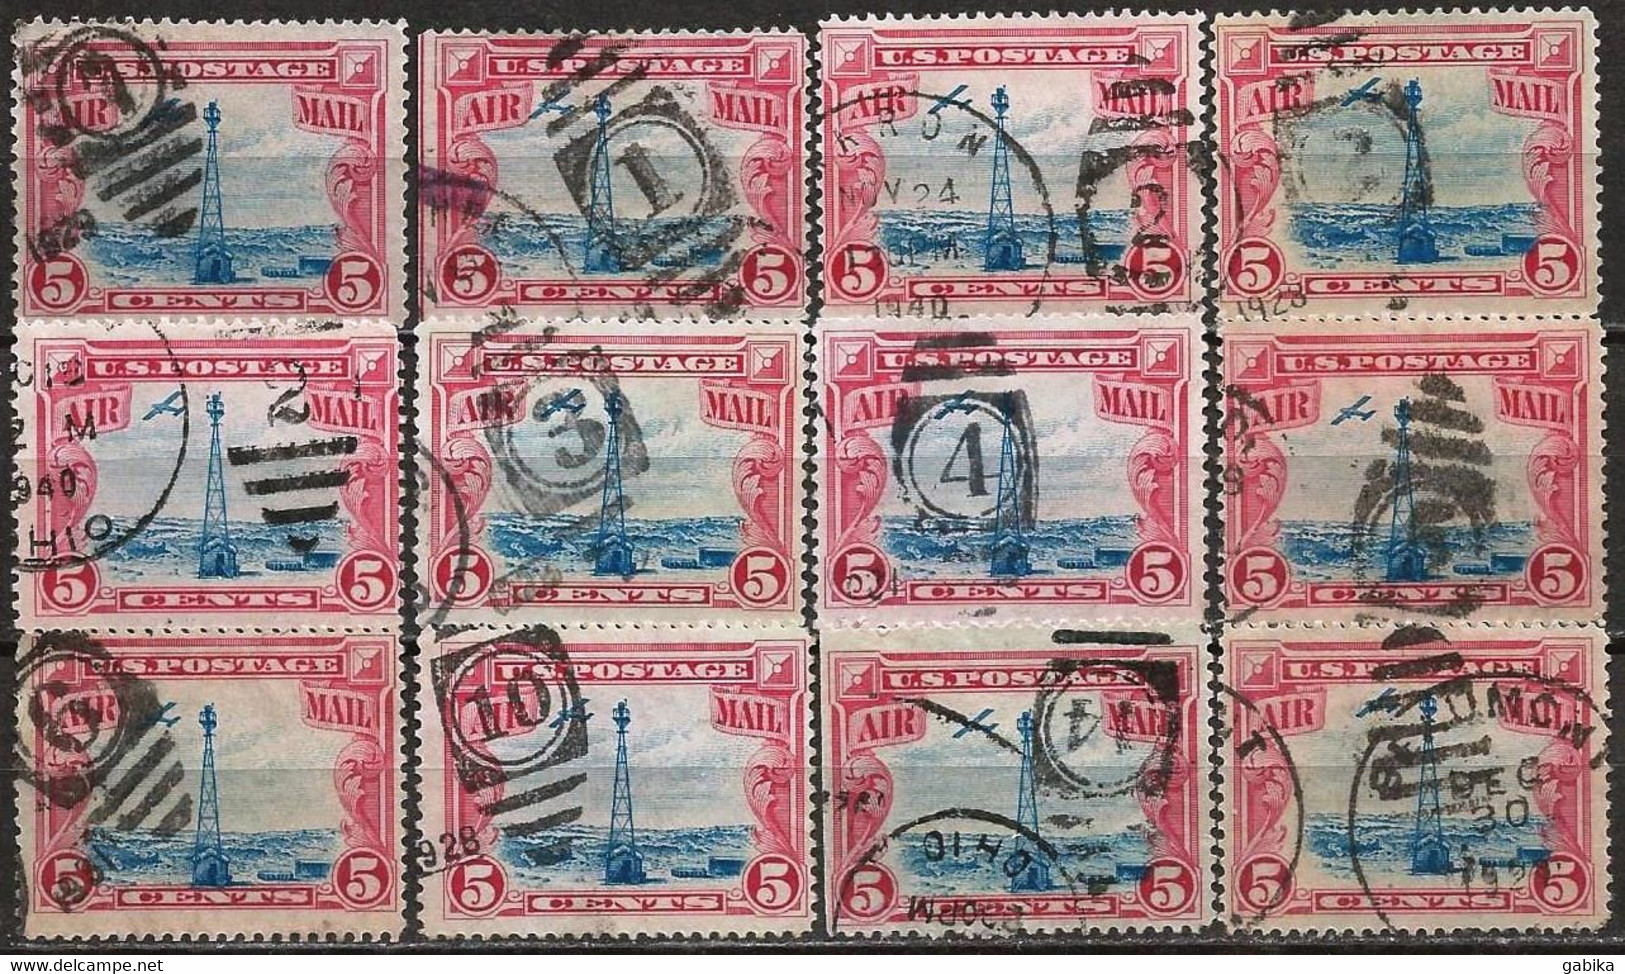 USA 1928, Scott C11, Used Air Mail, Duplex Oval Different Canceling, Beacon - 1a. 1918-1940 Gebraucht